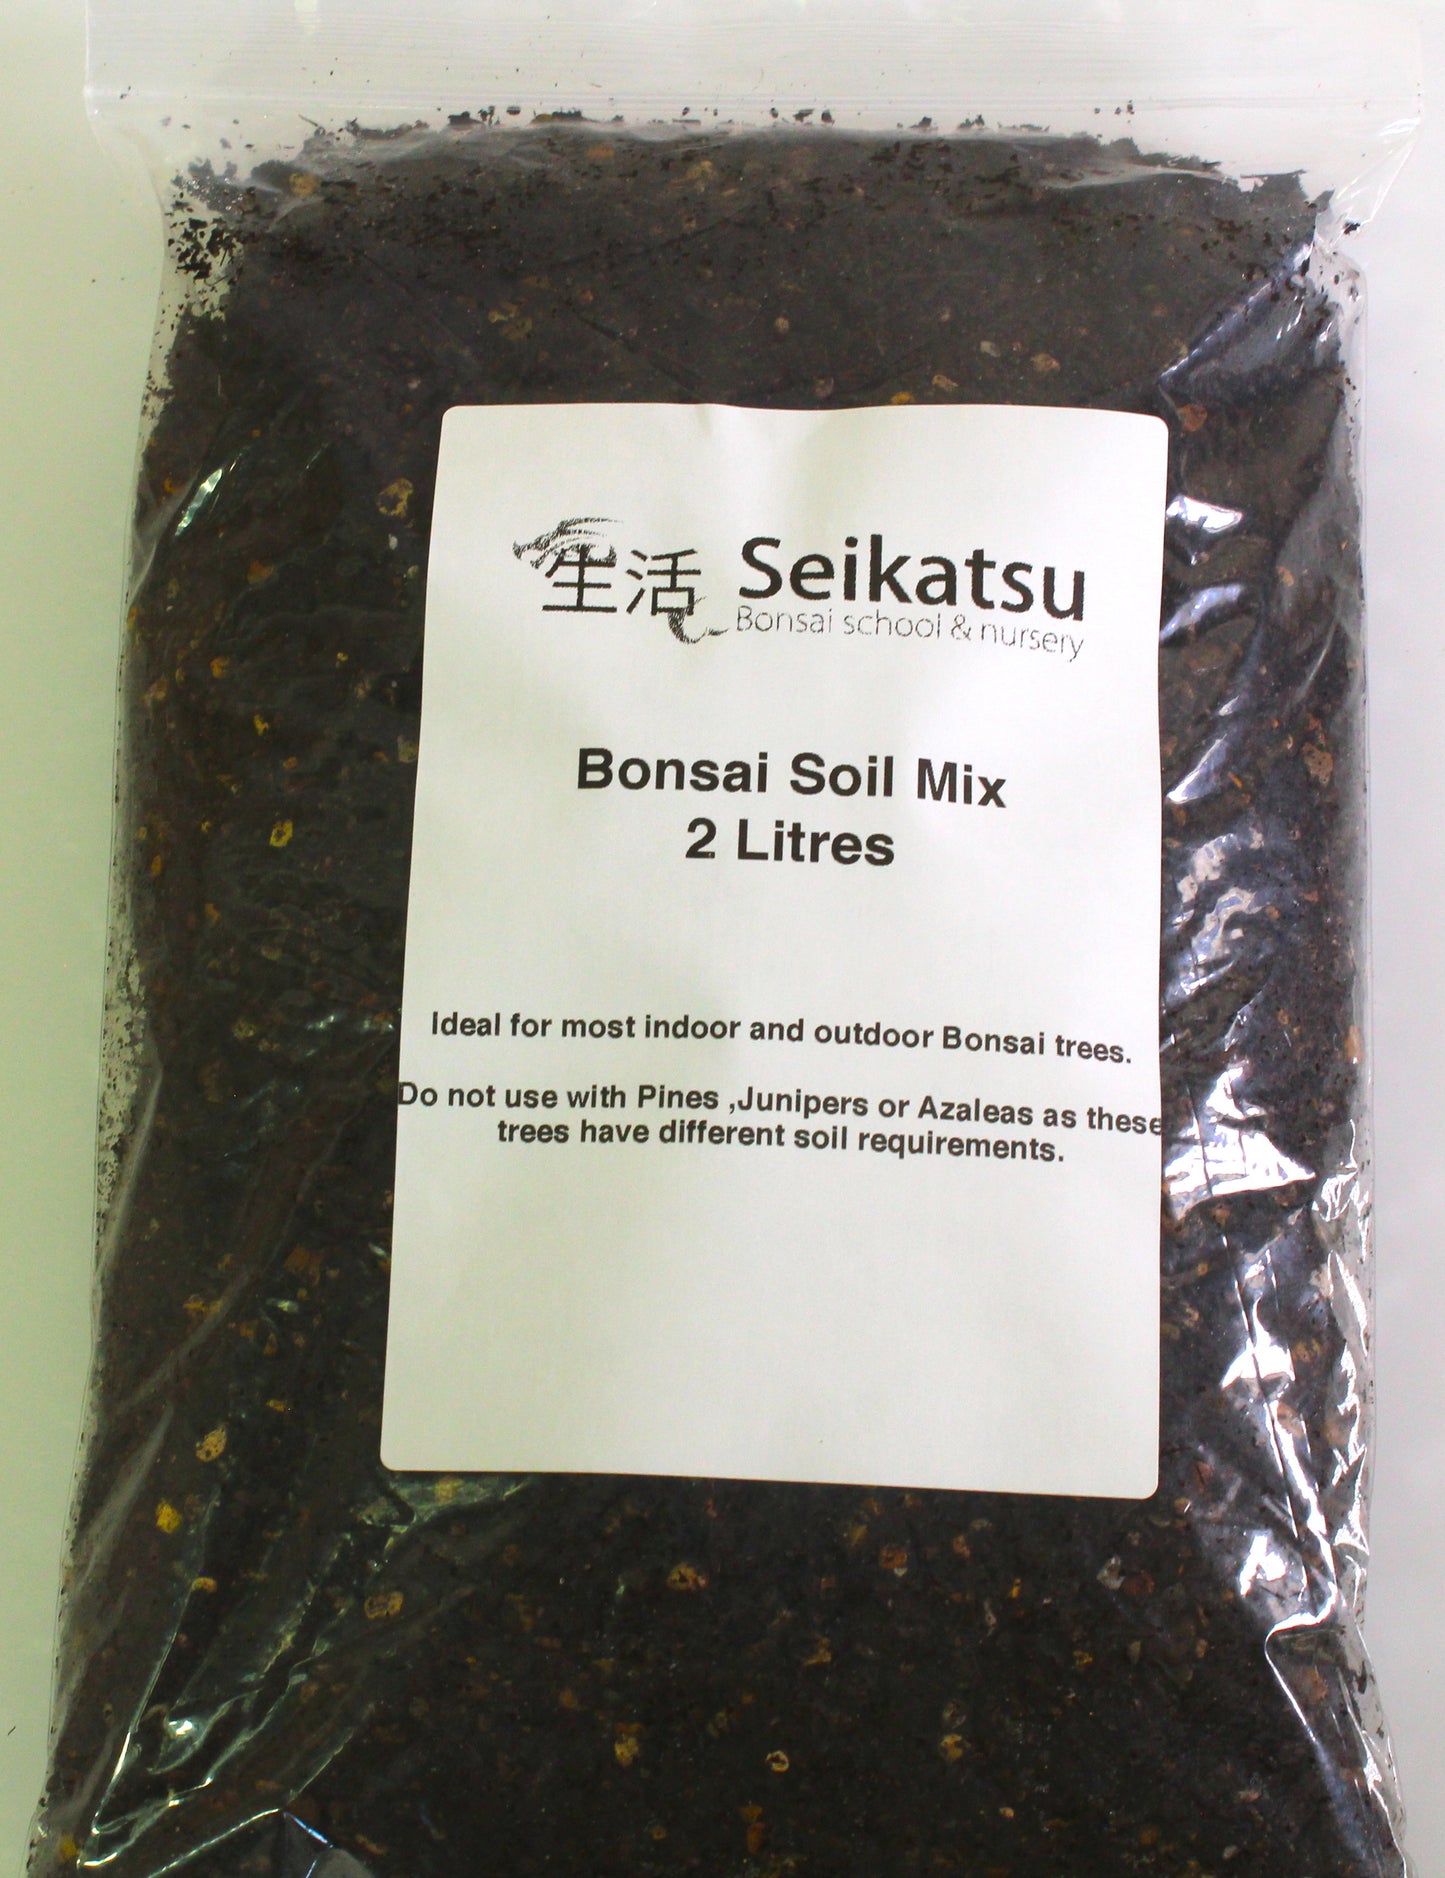 Bonsai Soil premixed and ready to use - choose the amount to suit you